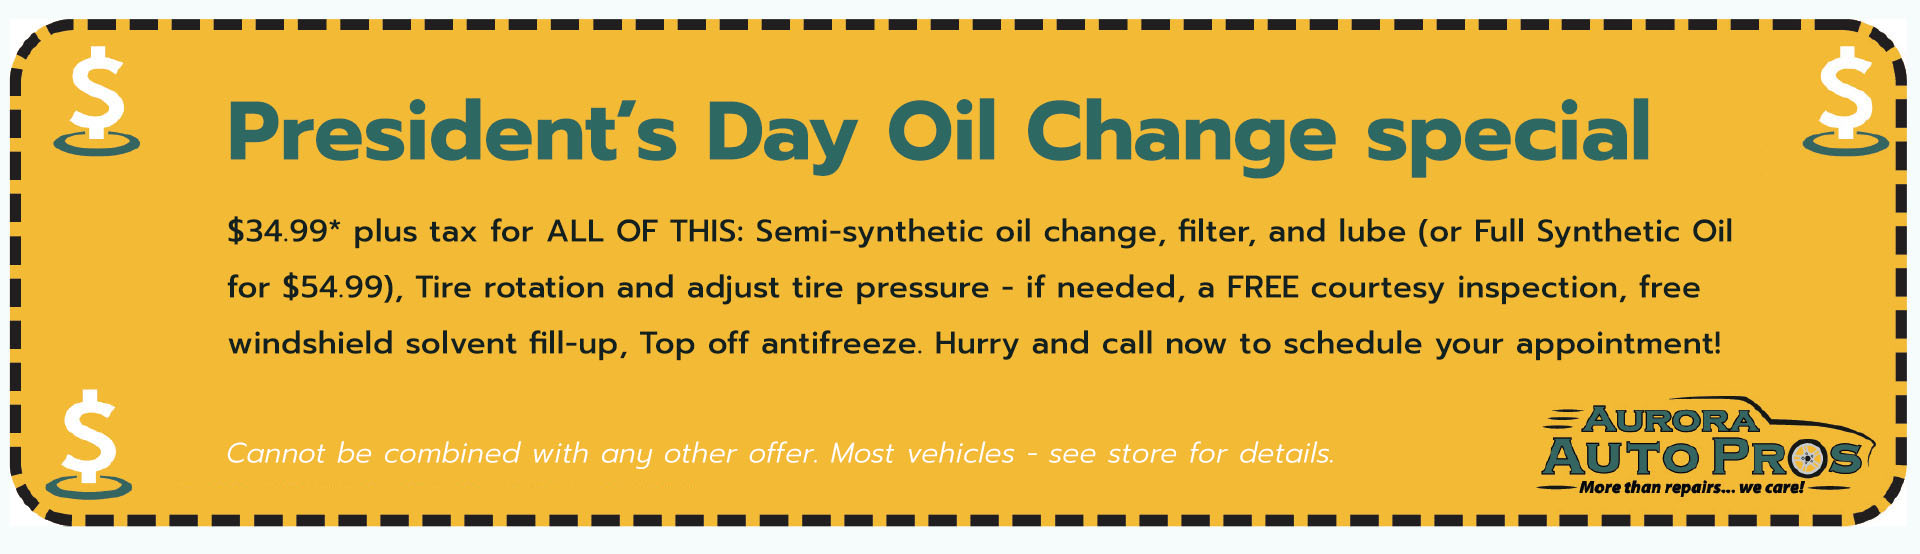 President's Day Oil Change Special